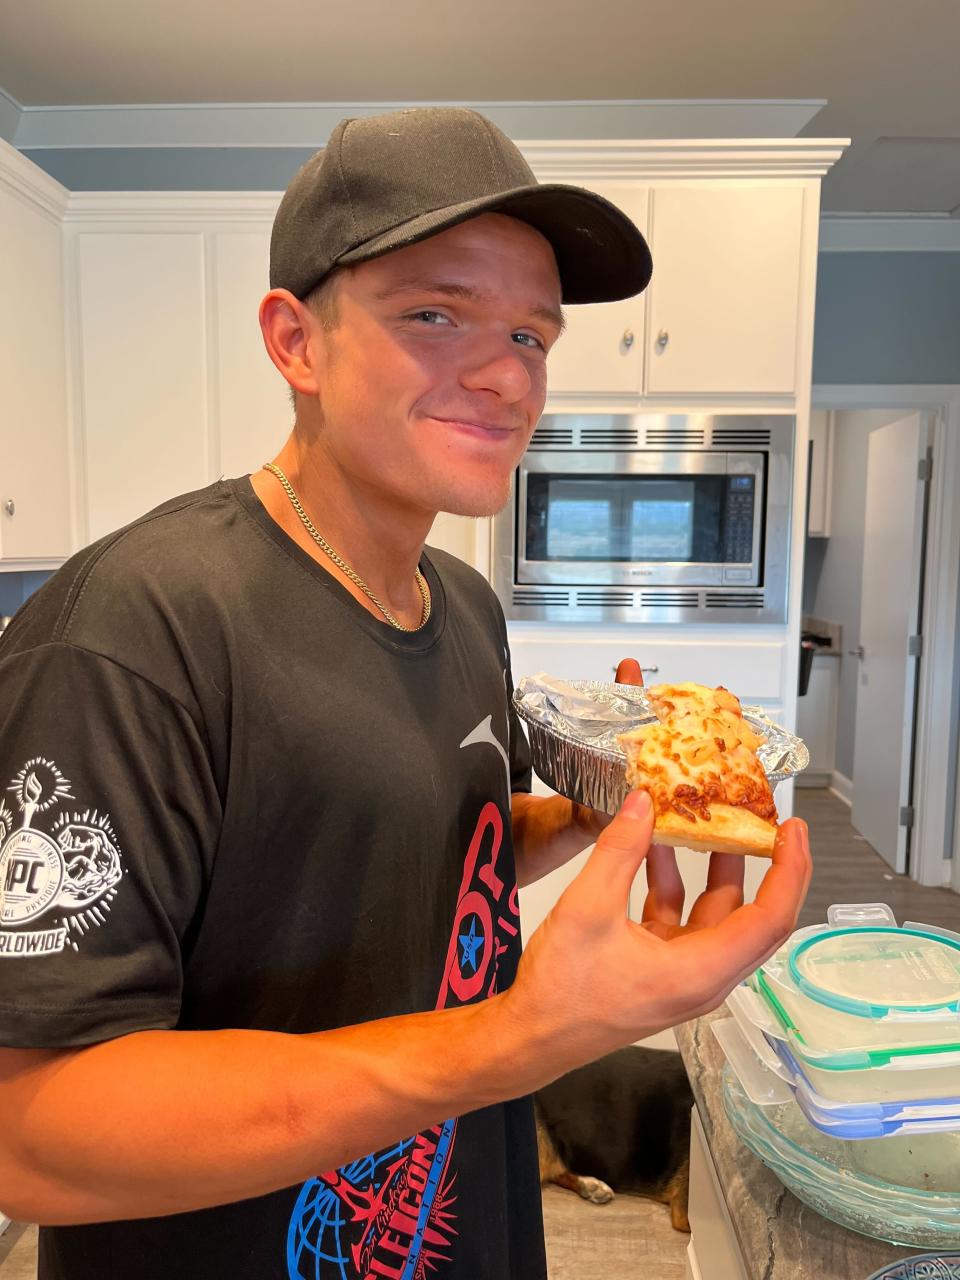 After intense dieting, Richard Dana enjoys his first bite of pizza post competition last year. He said that “it tasted better than anything I’ve eaten before.” | Courtesy of Richard Dana